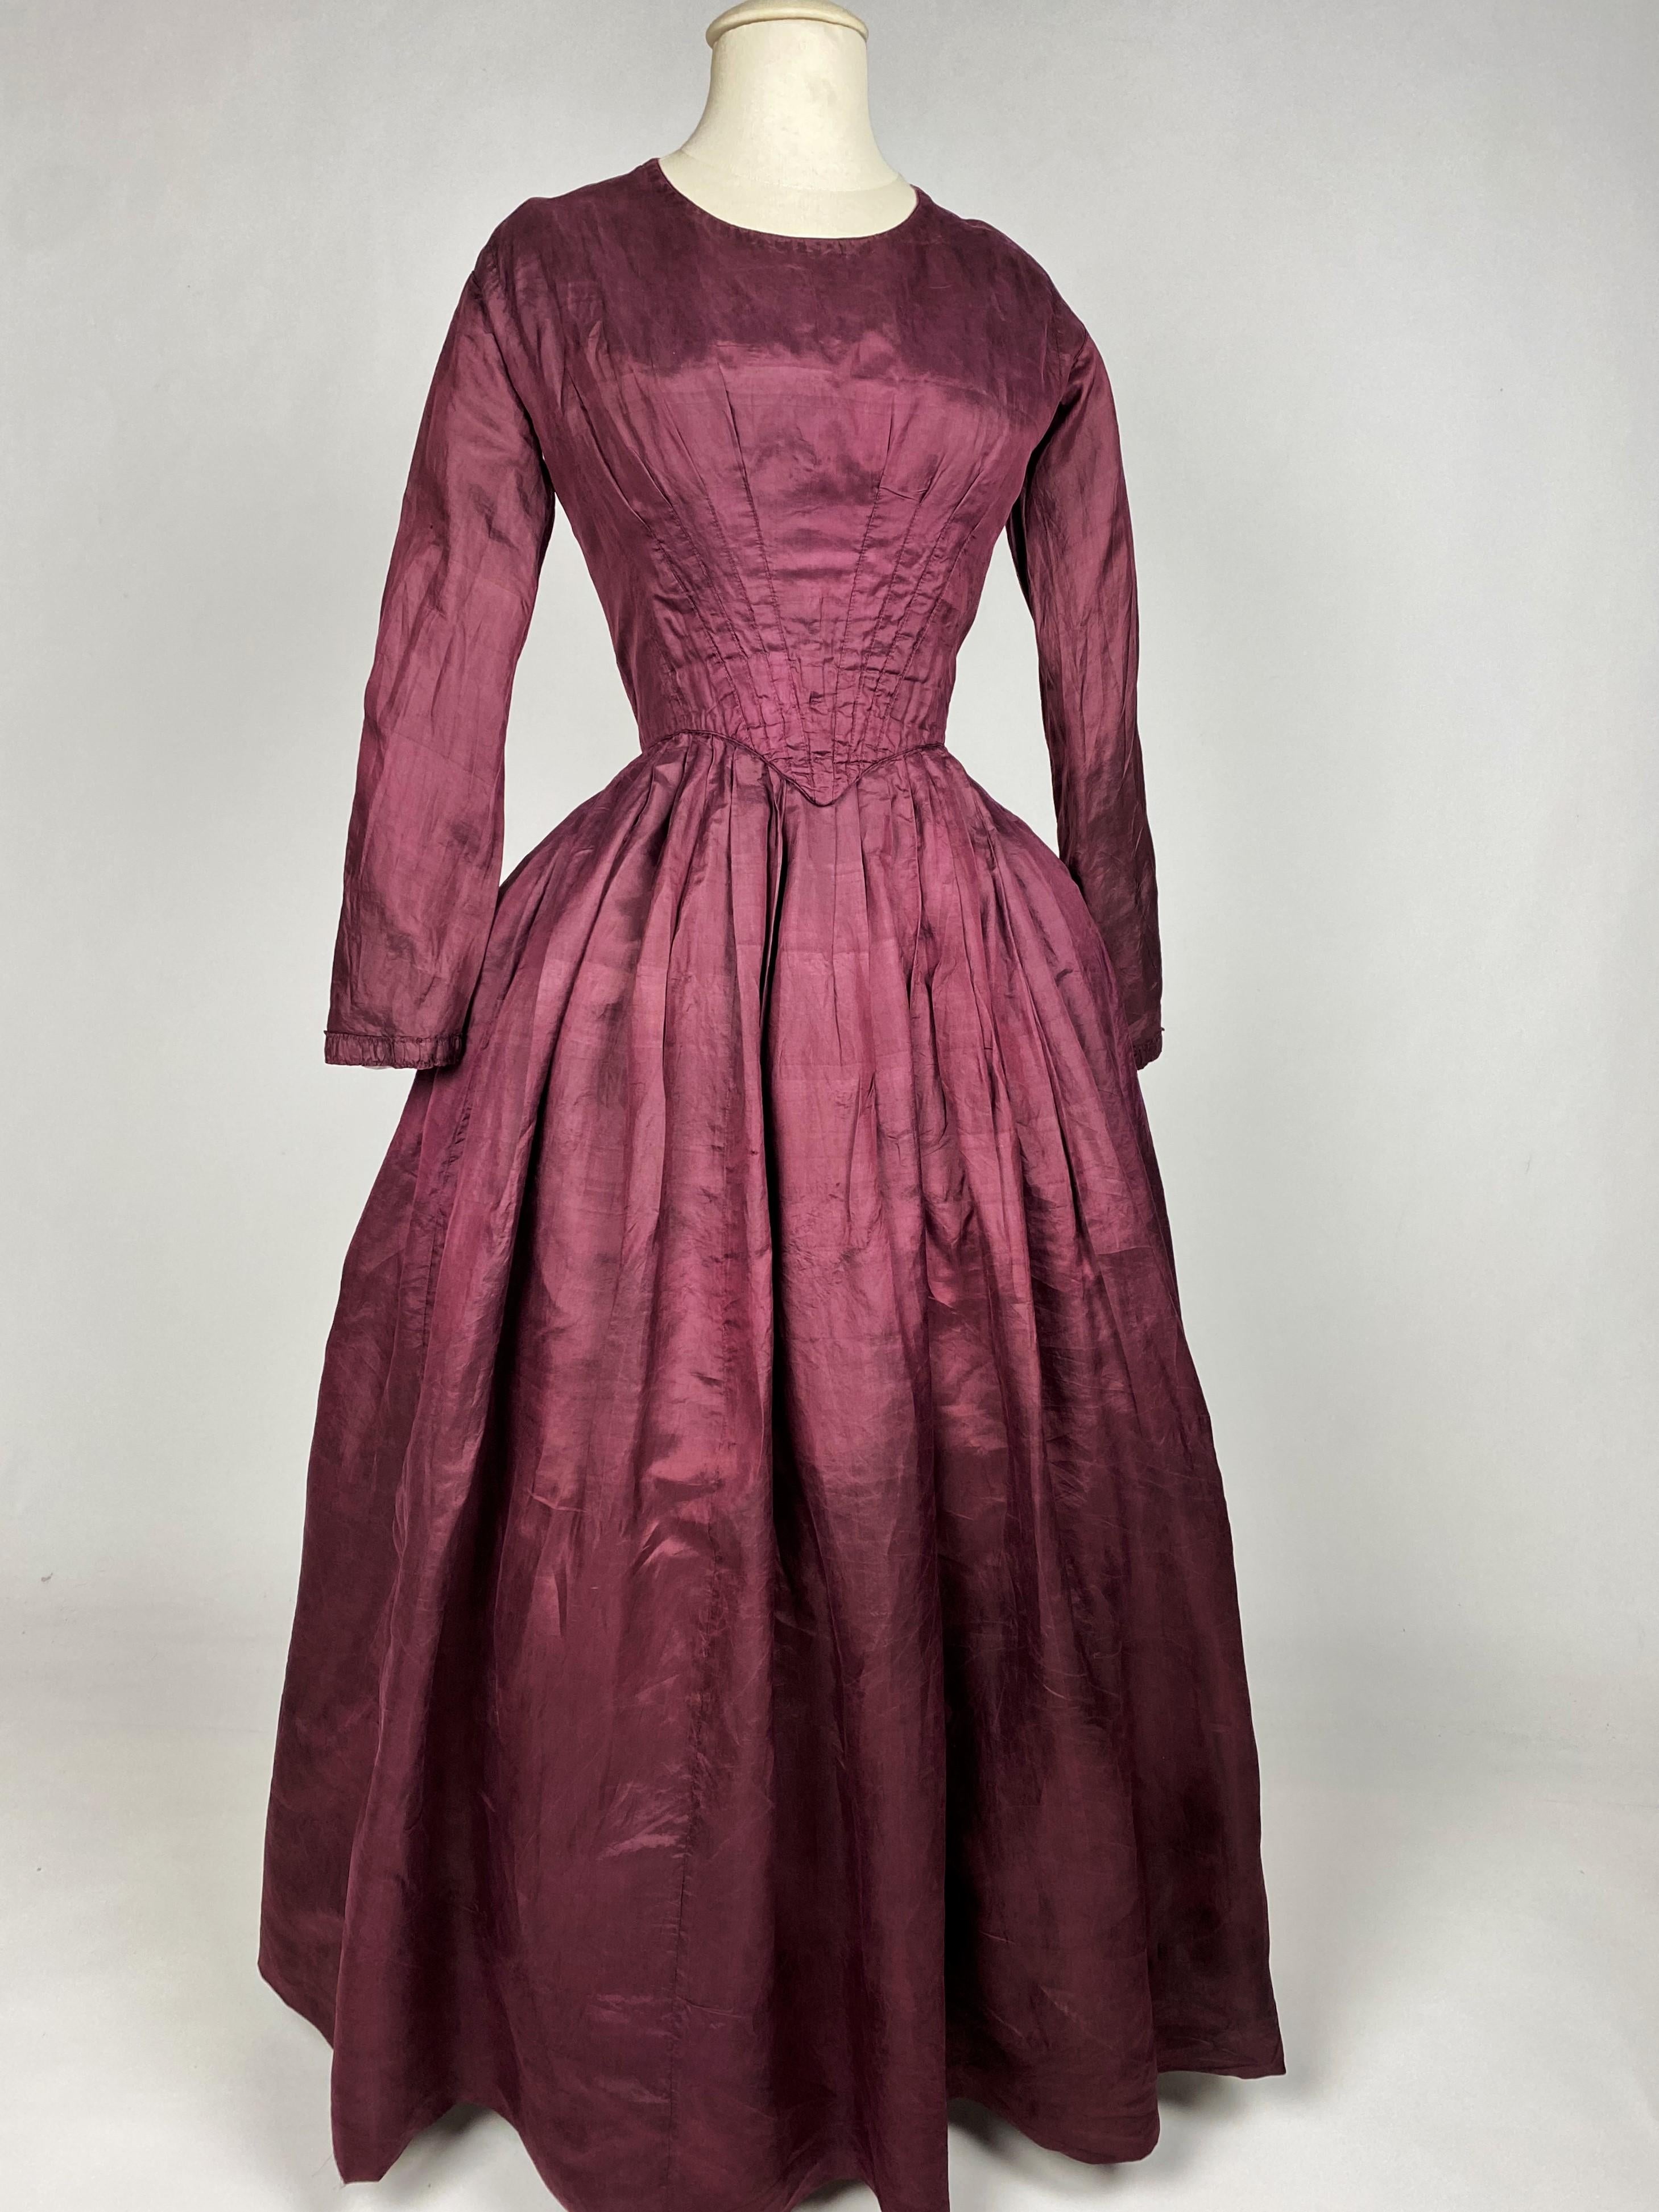 ball gowns 1800's england